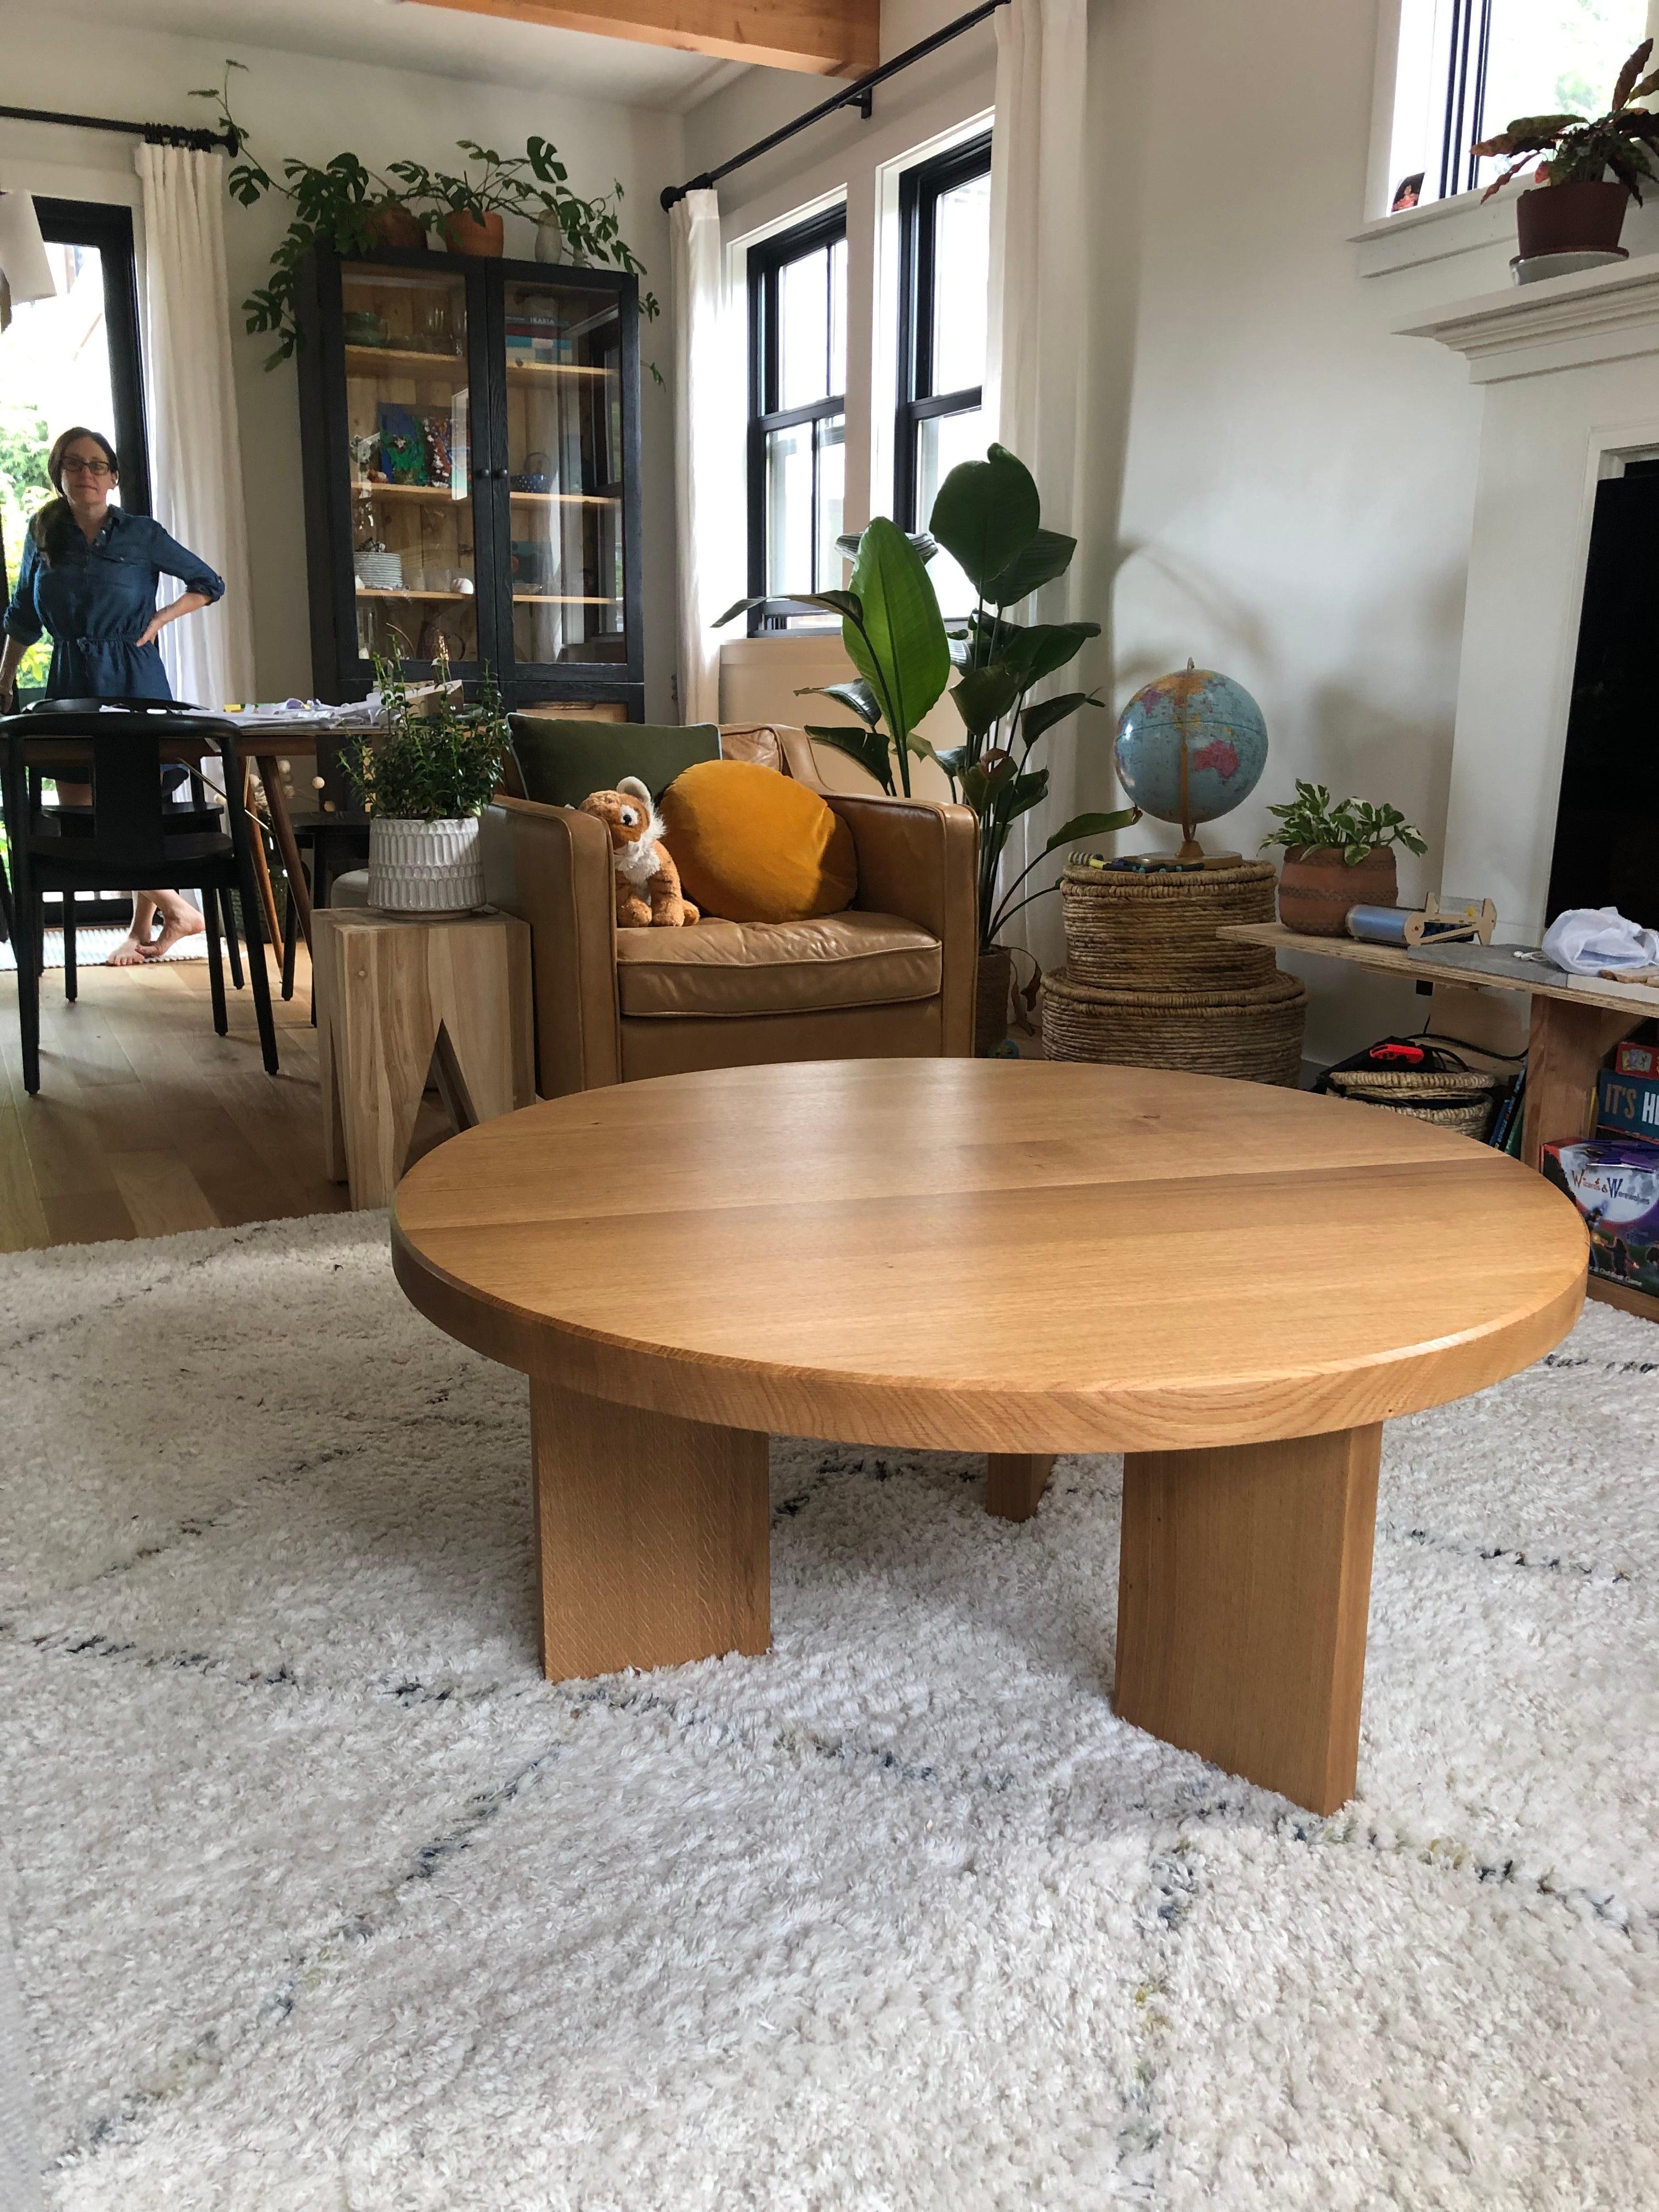 Our Oregon white oak round coffee tables are a beautiful addition to any home or lobby. Built by hand in our shop in Portland, Oregon, it is never mass produced ensuring each piece with the highest quality and care we can offer. It is crafted in